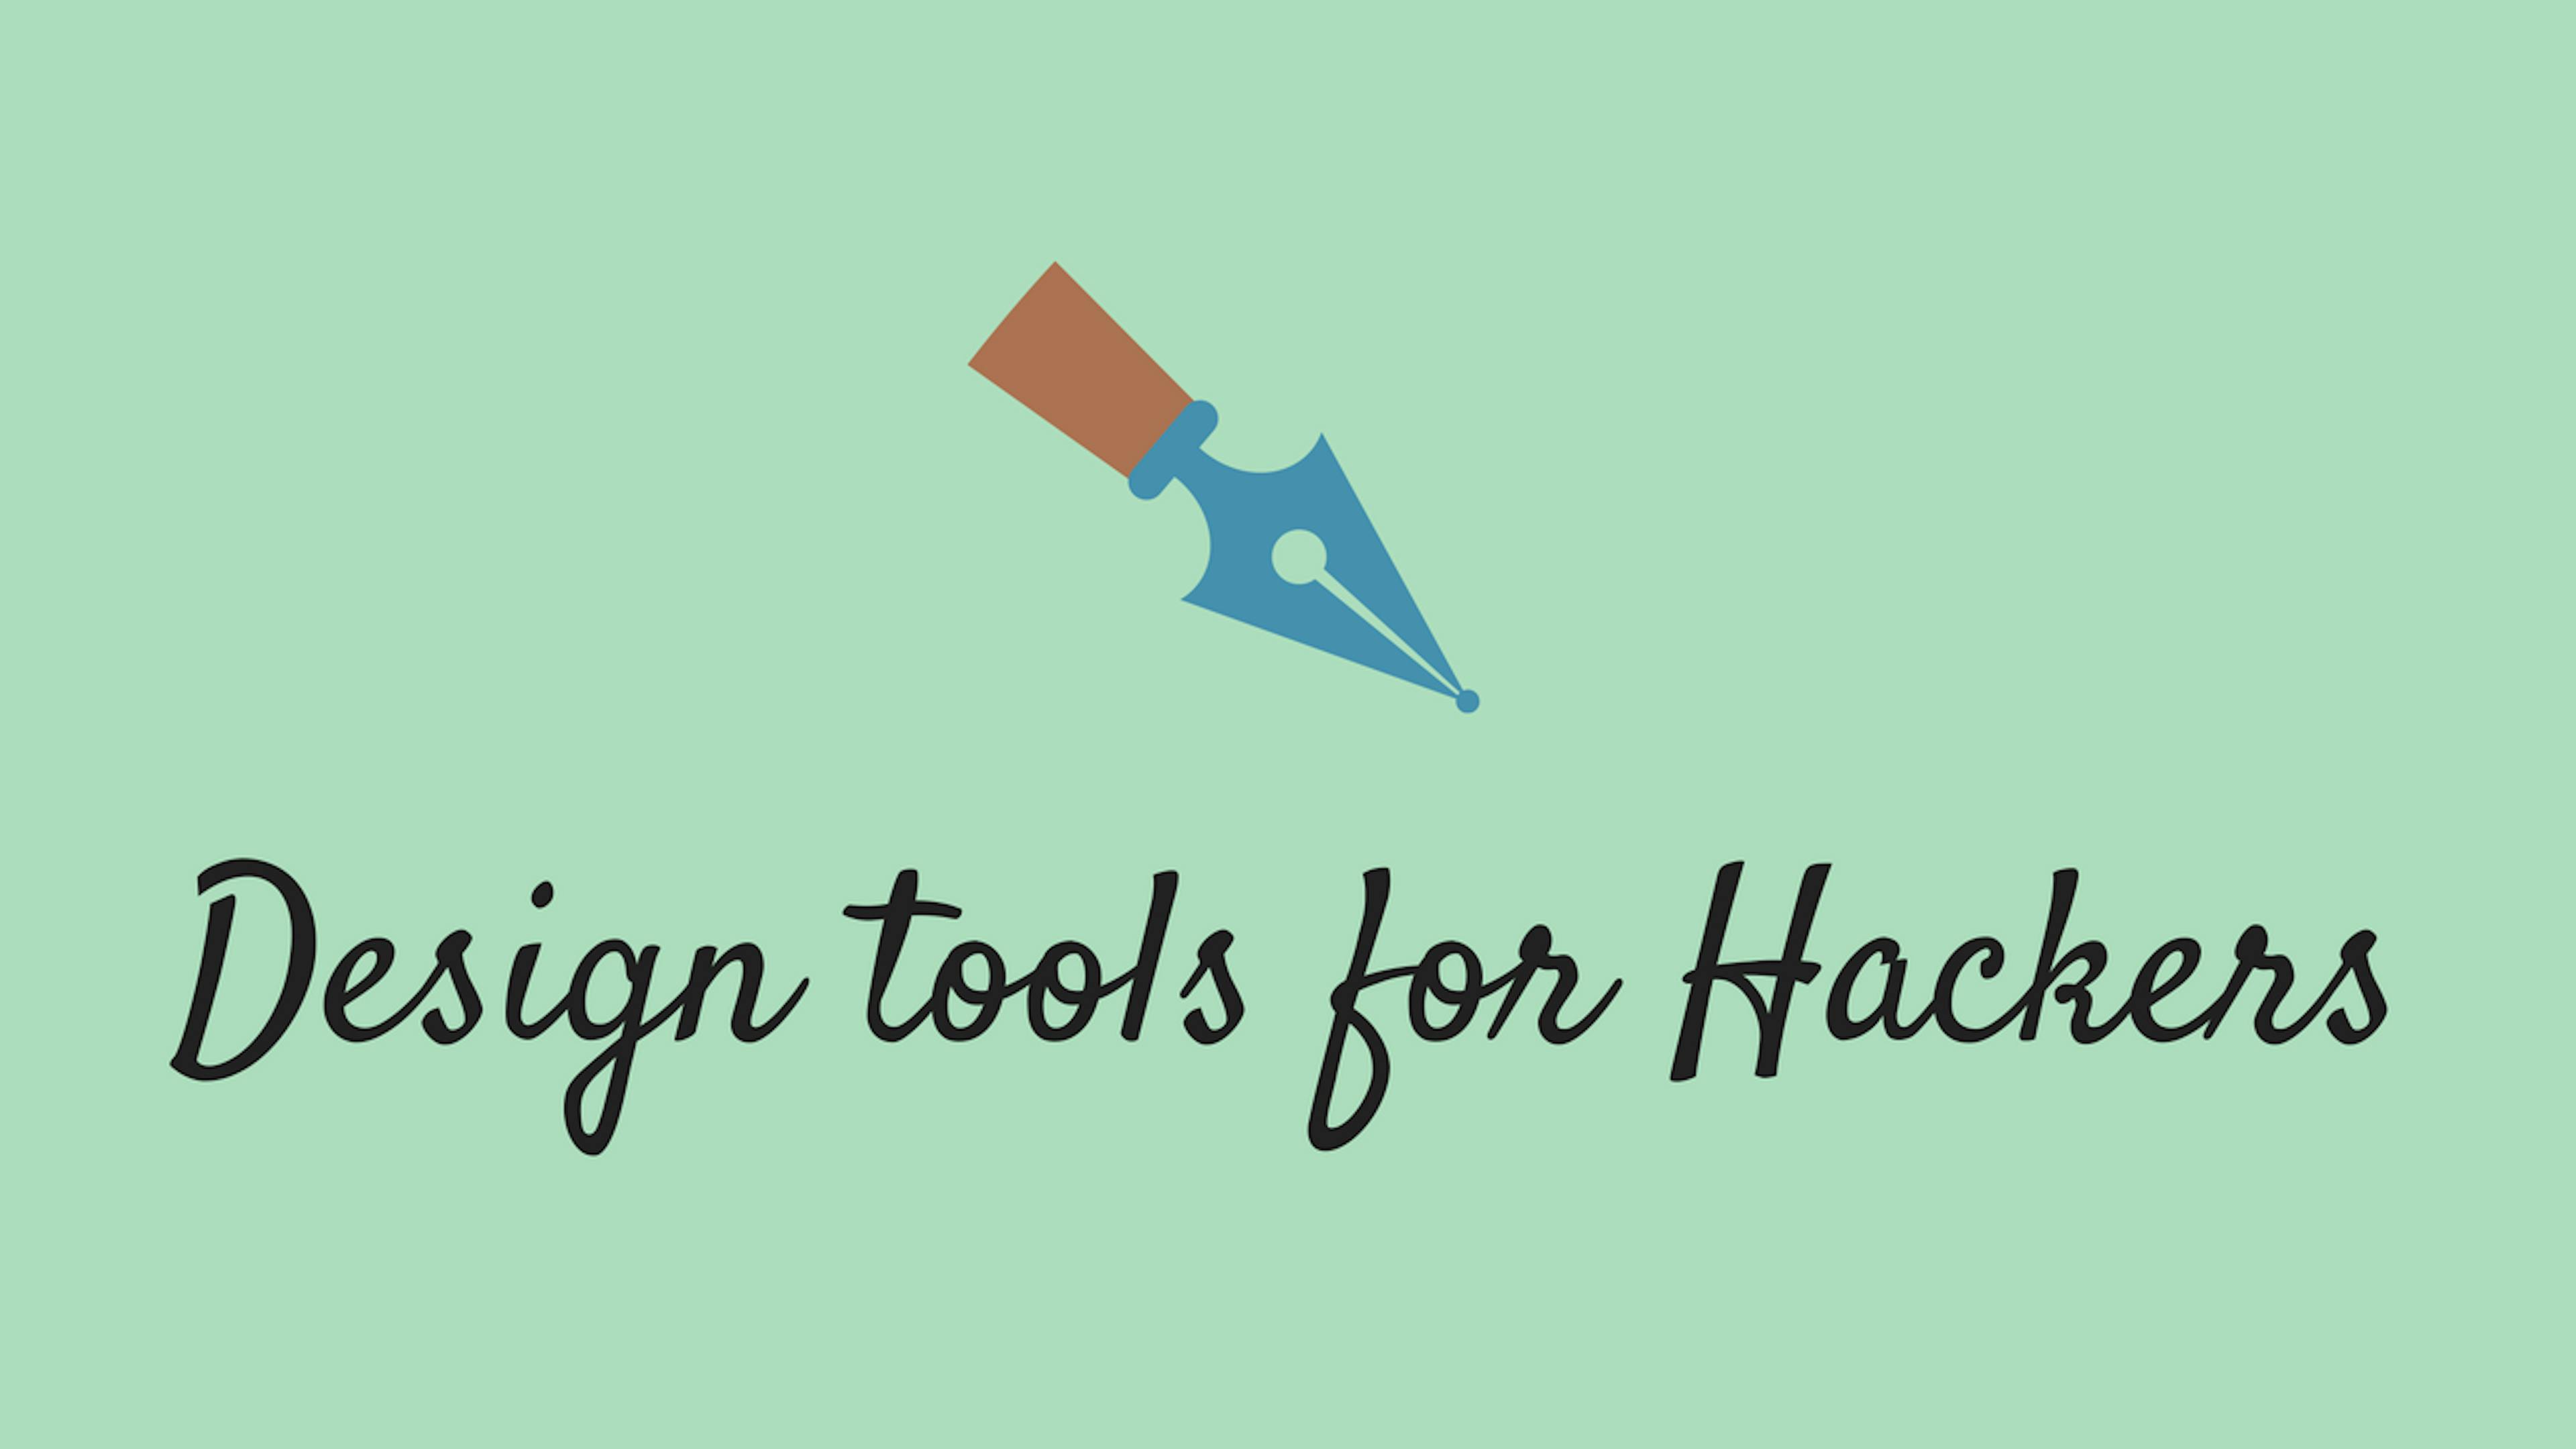 featured image - Graphic Design Tools For Hackers